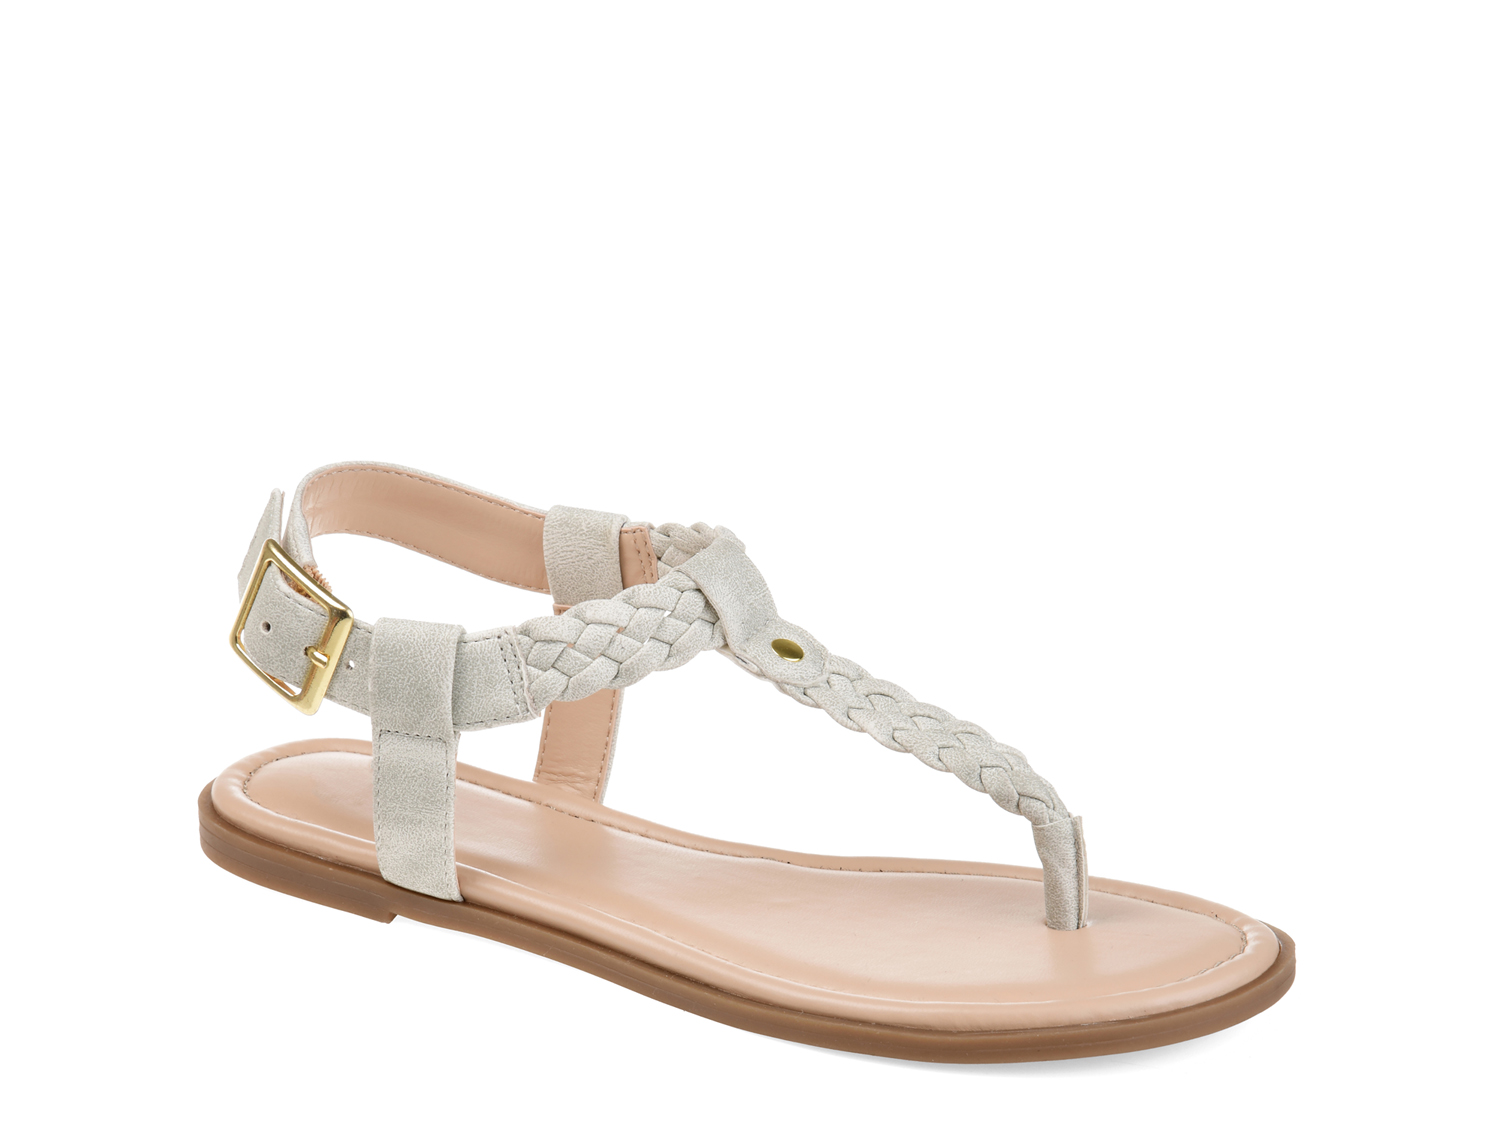 Details about   Women's Journee Collection Harmony Sandal Black 